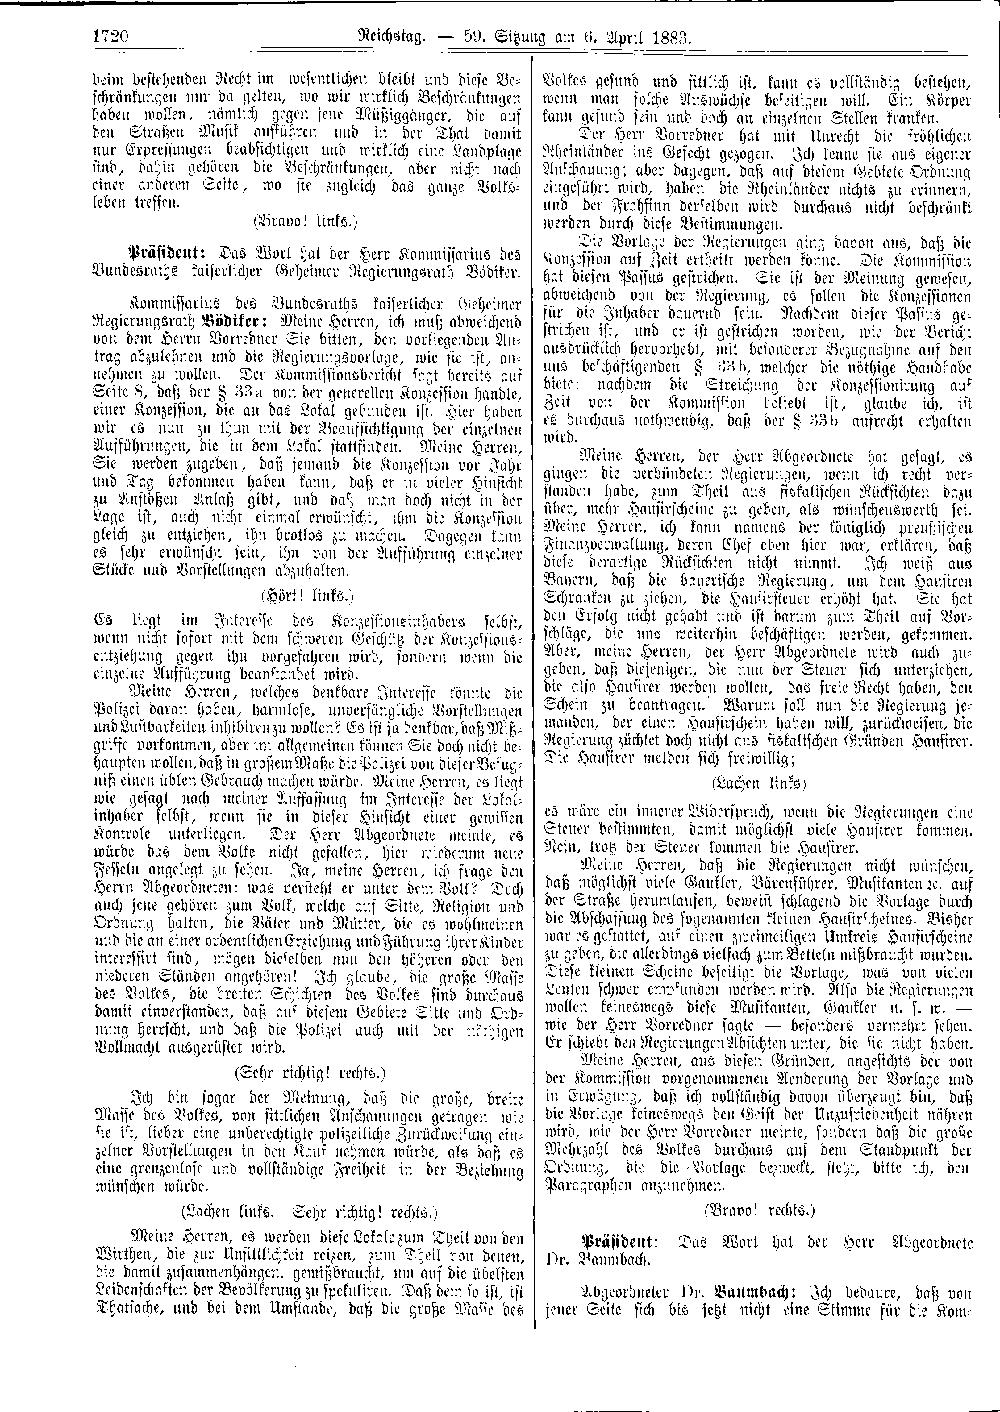 Scan of page 1720